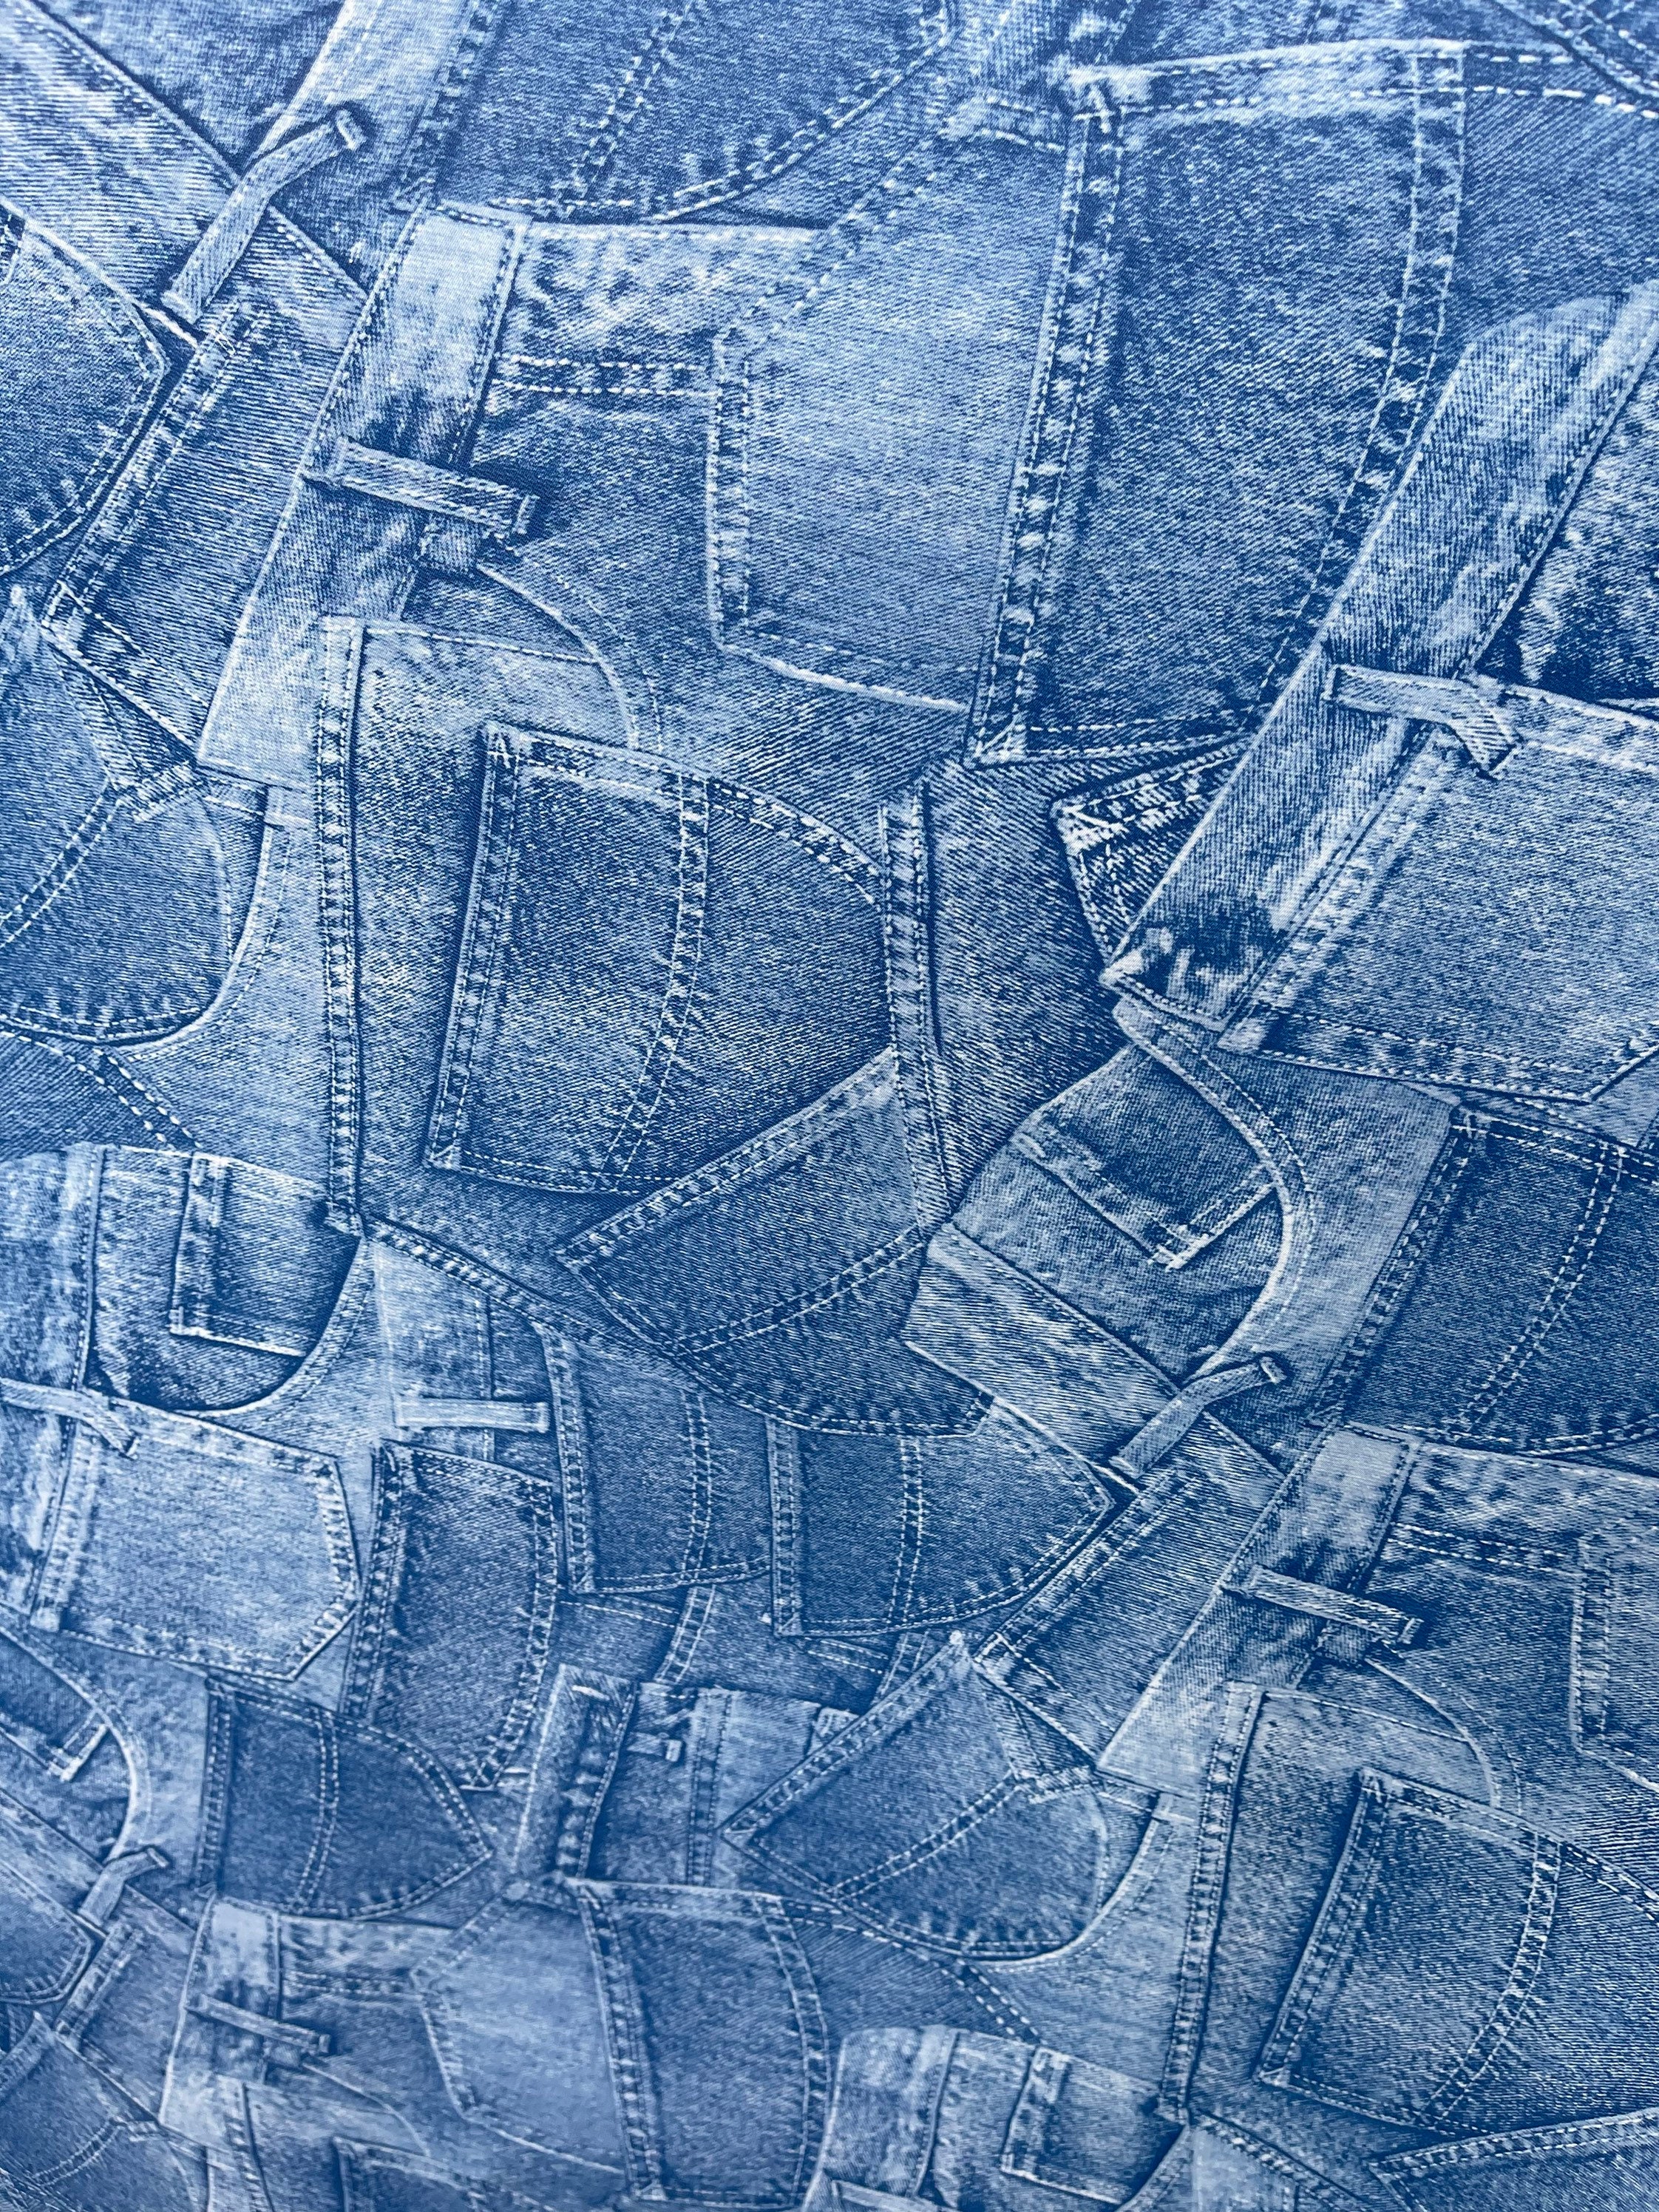 Jeans Design Denim Looking Print on Vinyl Non Stretch Heavy Weight 58/60  Sold by the YD. Ships Worldwide From Los Angeles California USA. -   Denmark